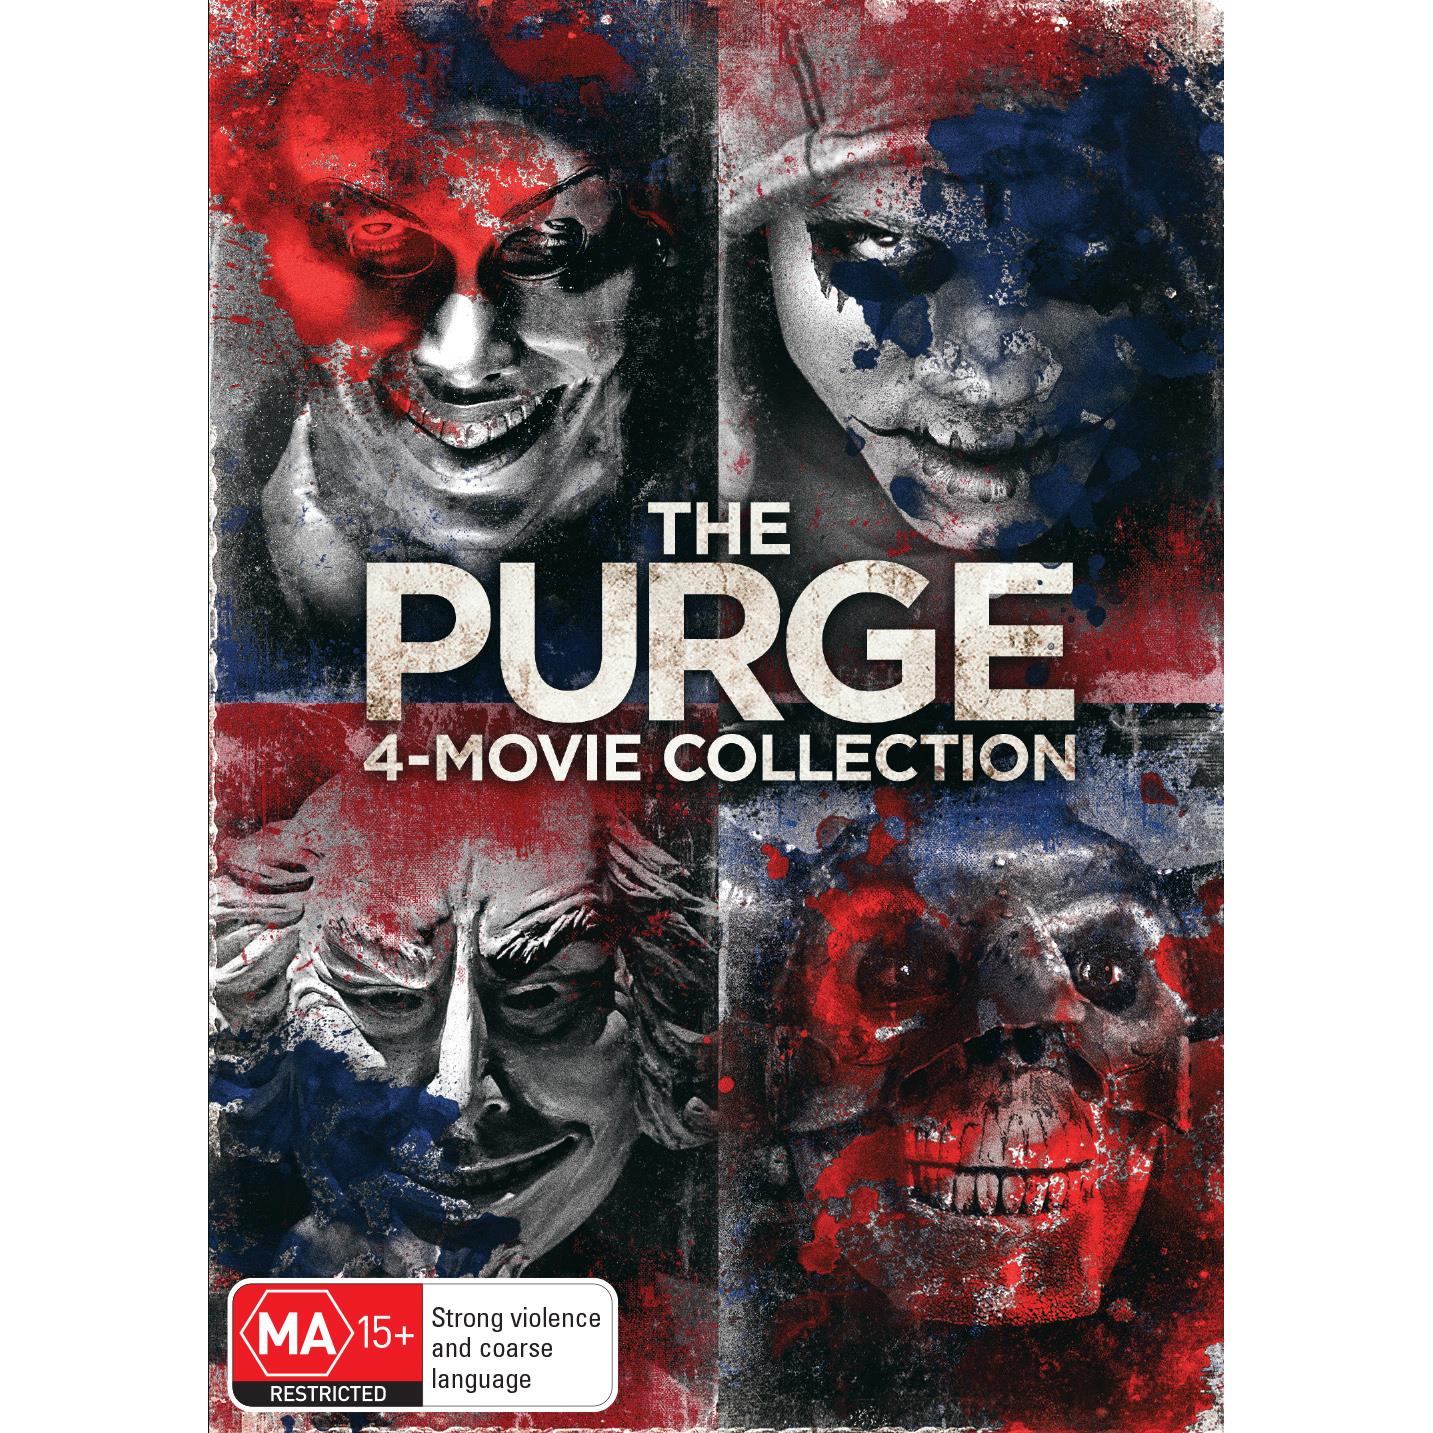 Https Www Jbhifi Com Au Products First Purge The 2018 Dvd 2020 10 28t18 45 05 11 00 Daily Https Cdn Shopify Com S Files 1 0024 9803 5810 Products 335828 Product 0 I 6d257b7b 8b14 4507 920a D2122fcfe048 Jpg V 1572321569 First Purge The - roblox escape room how to get the niffler and imaginary